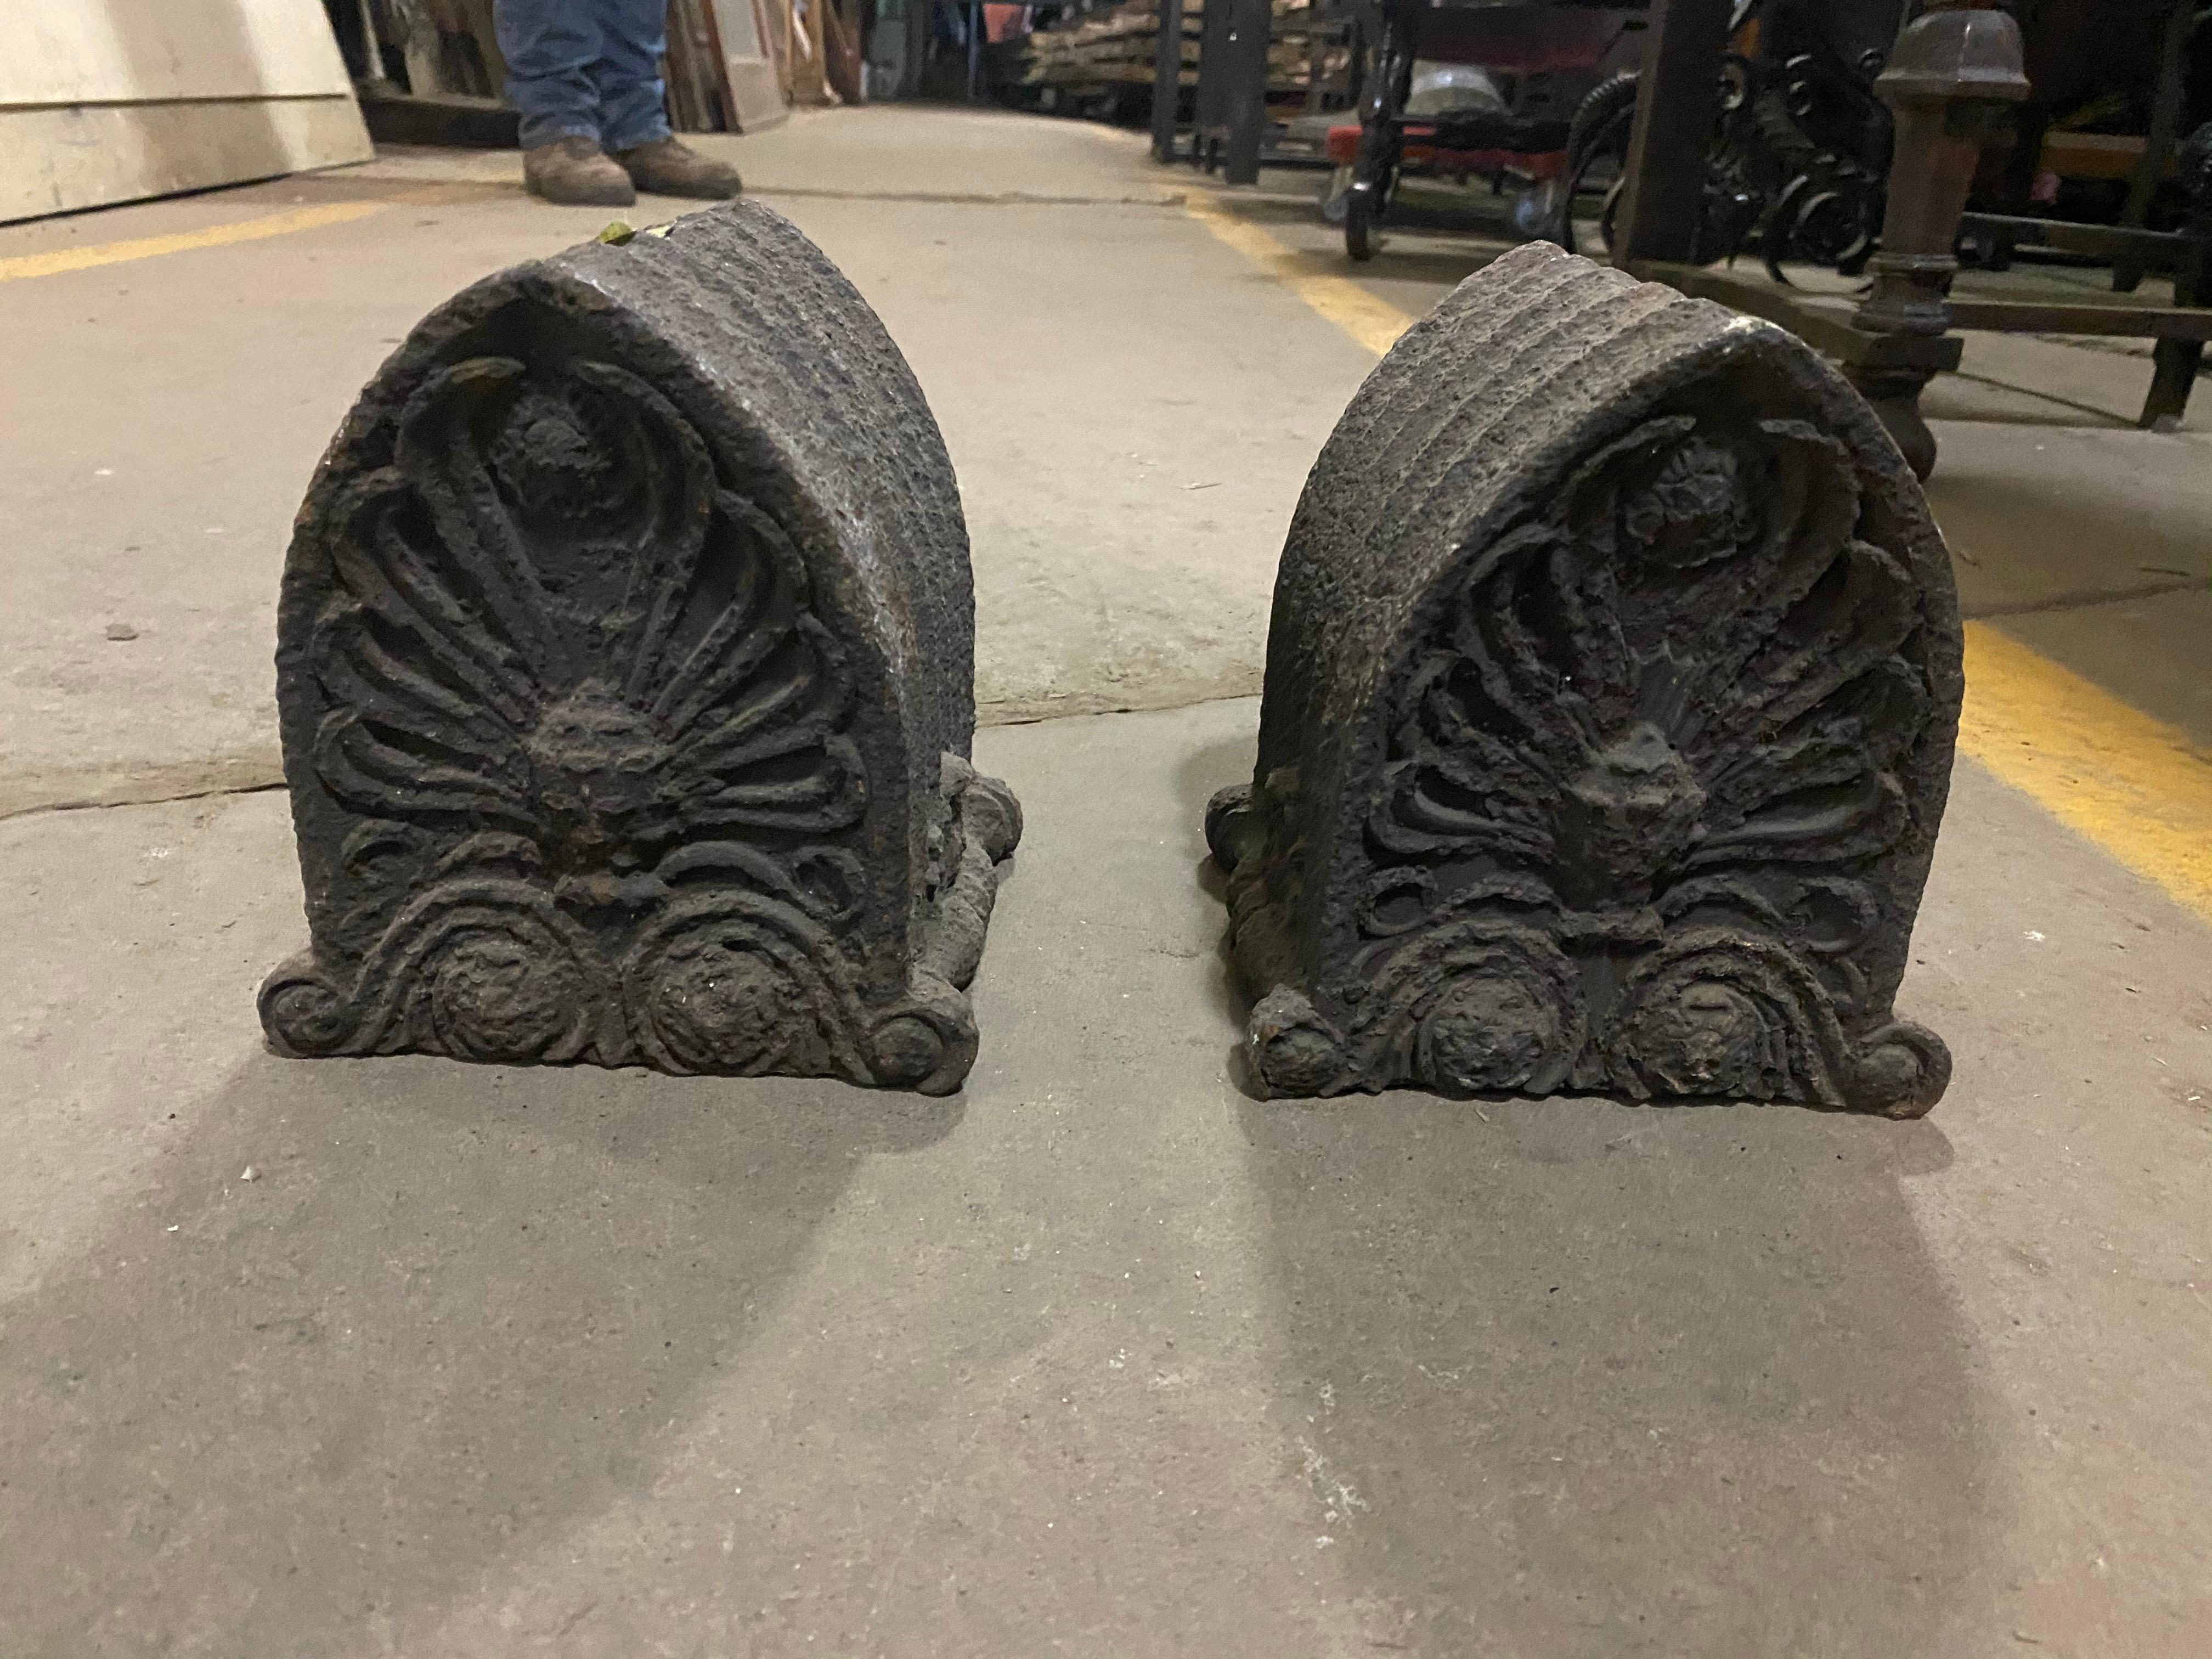 Pair of cast iron ornaments from a 1890s Gothic building cornice. These make great bookends or other mantel piece décor. Priced as a pair. Please note, this item is located in our Scranton, PA location.